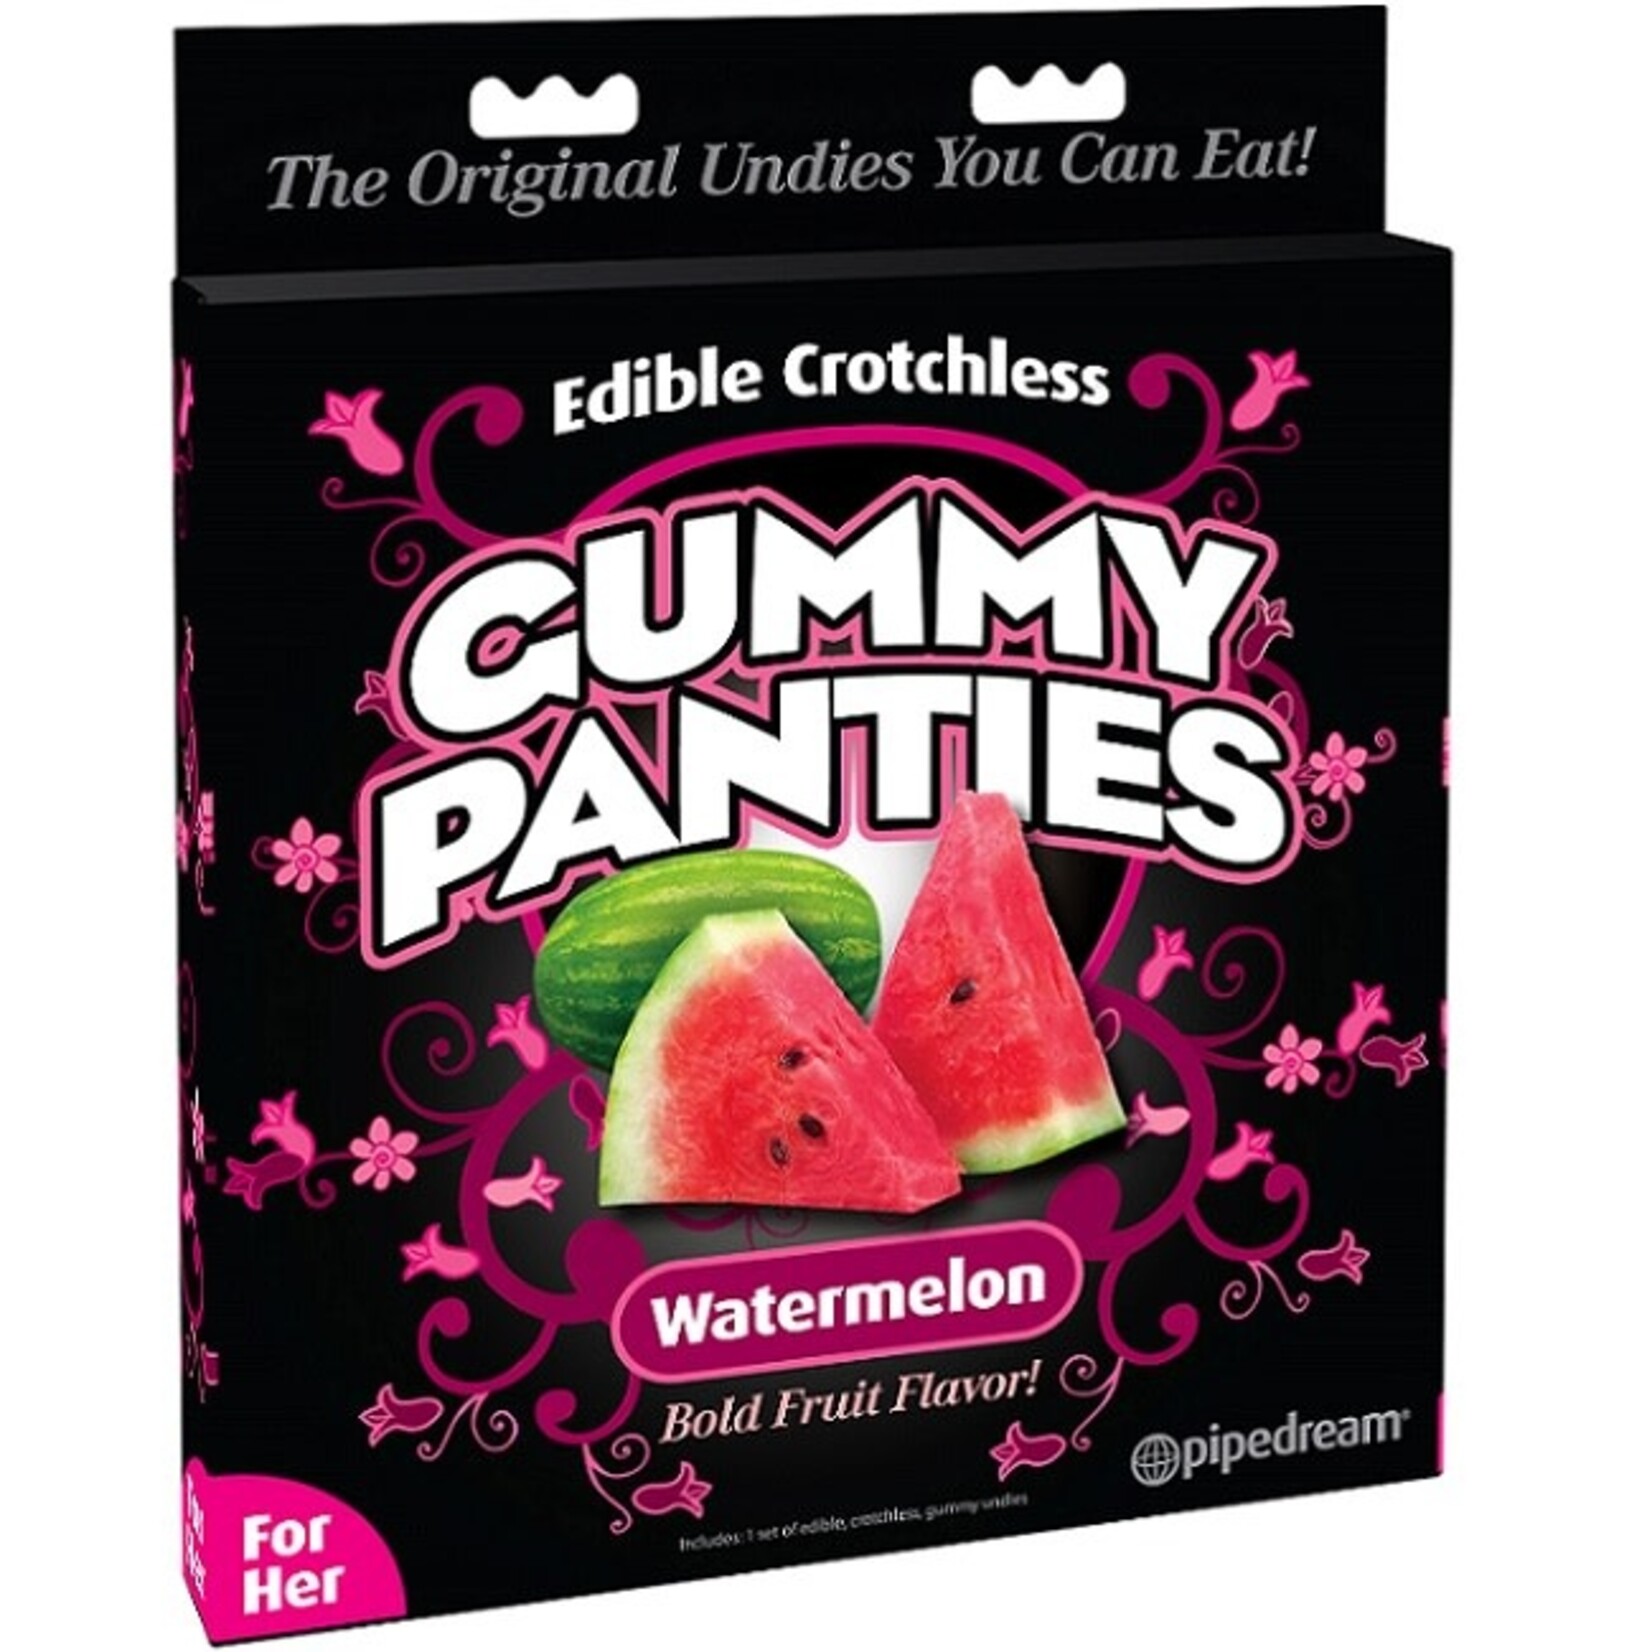 Pipedream Edible Crotchless Gummy Panties For Her